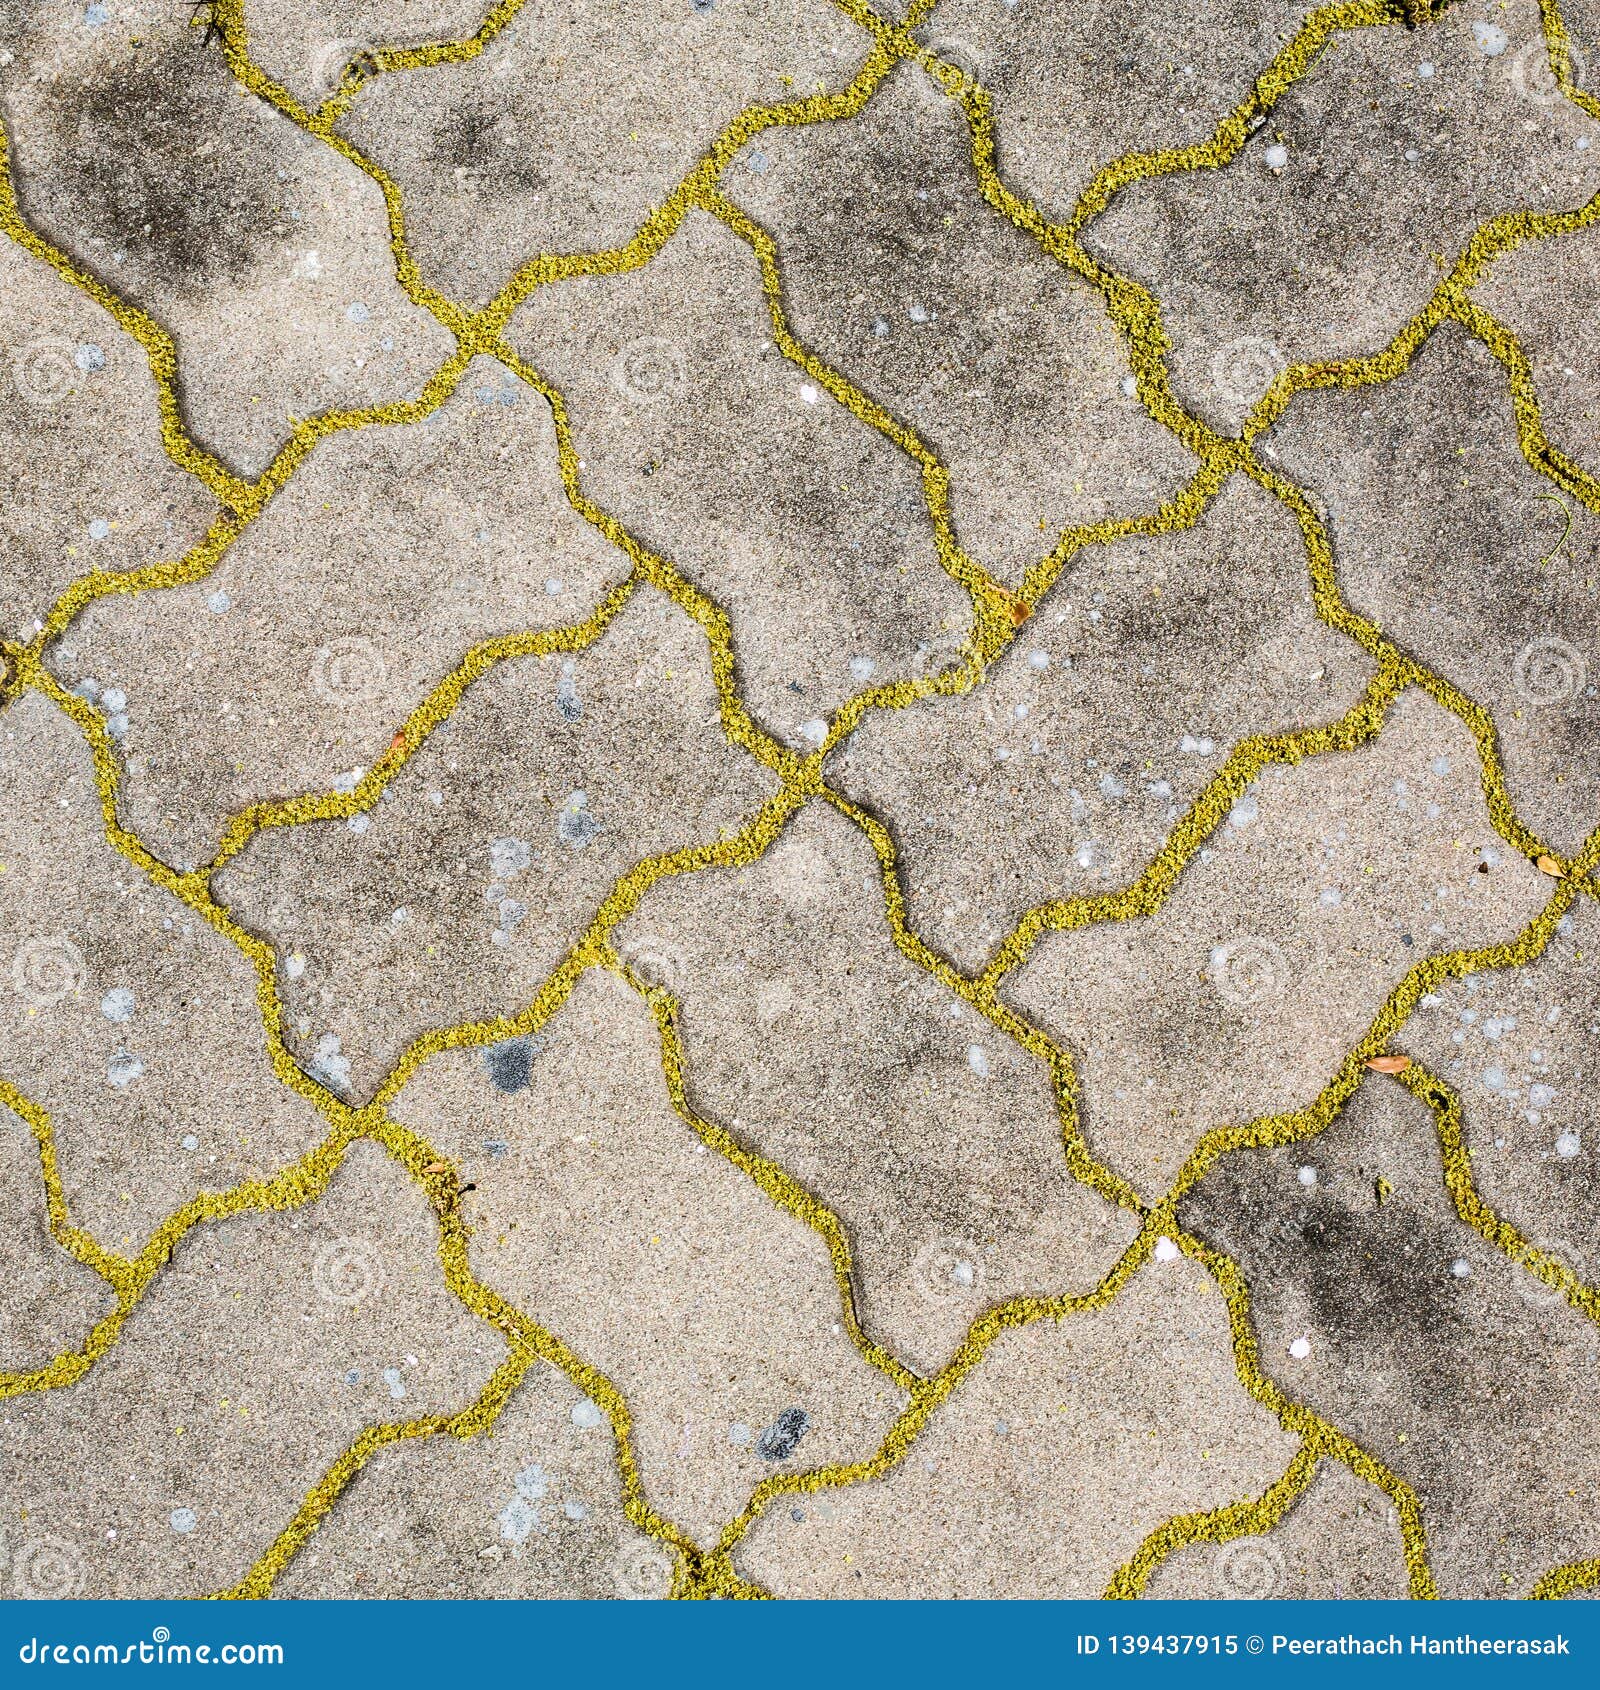 worm brick being colorize with yellow pollen - samut sakhon, thailand